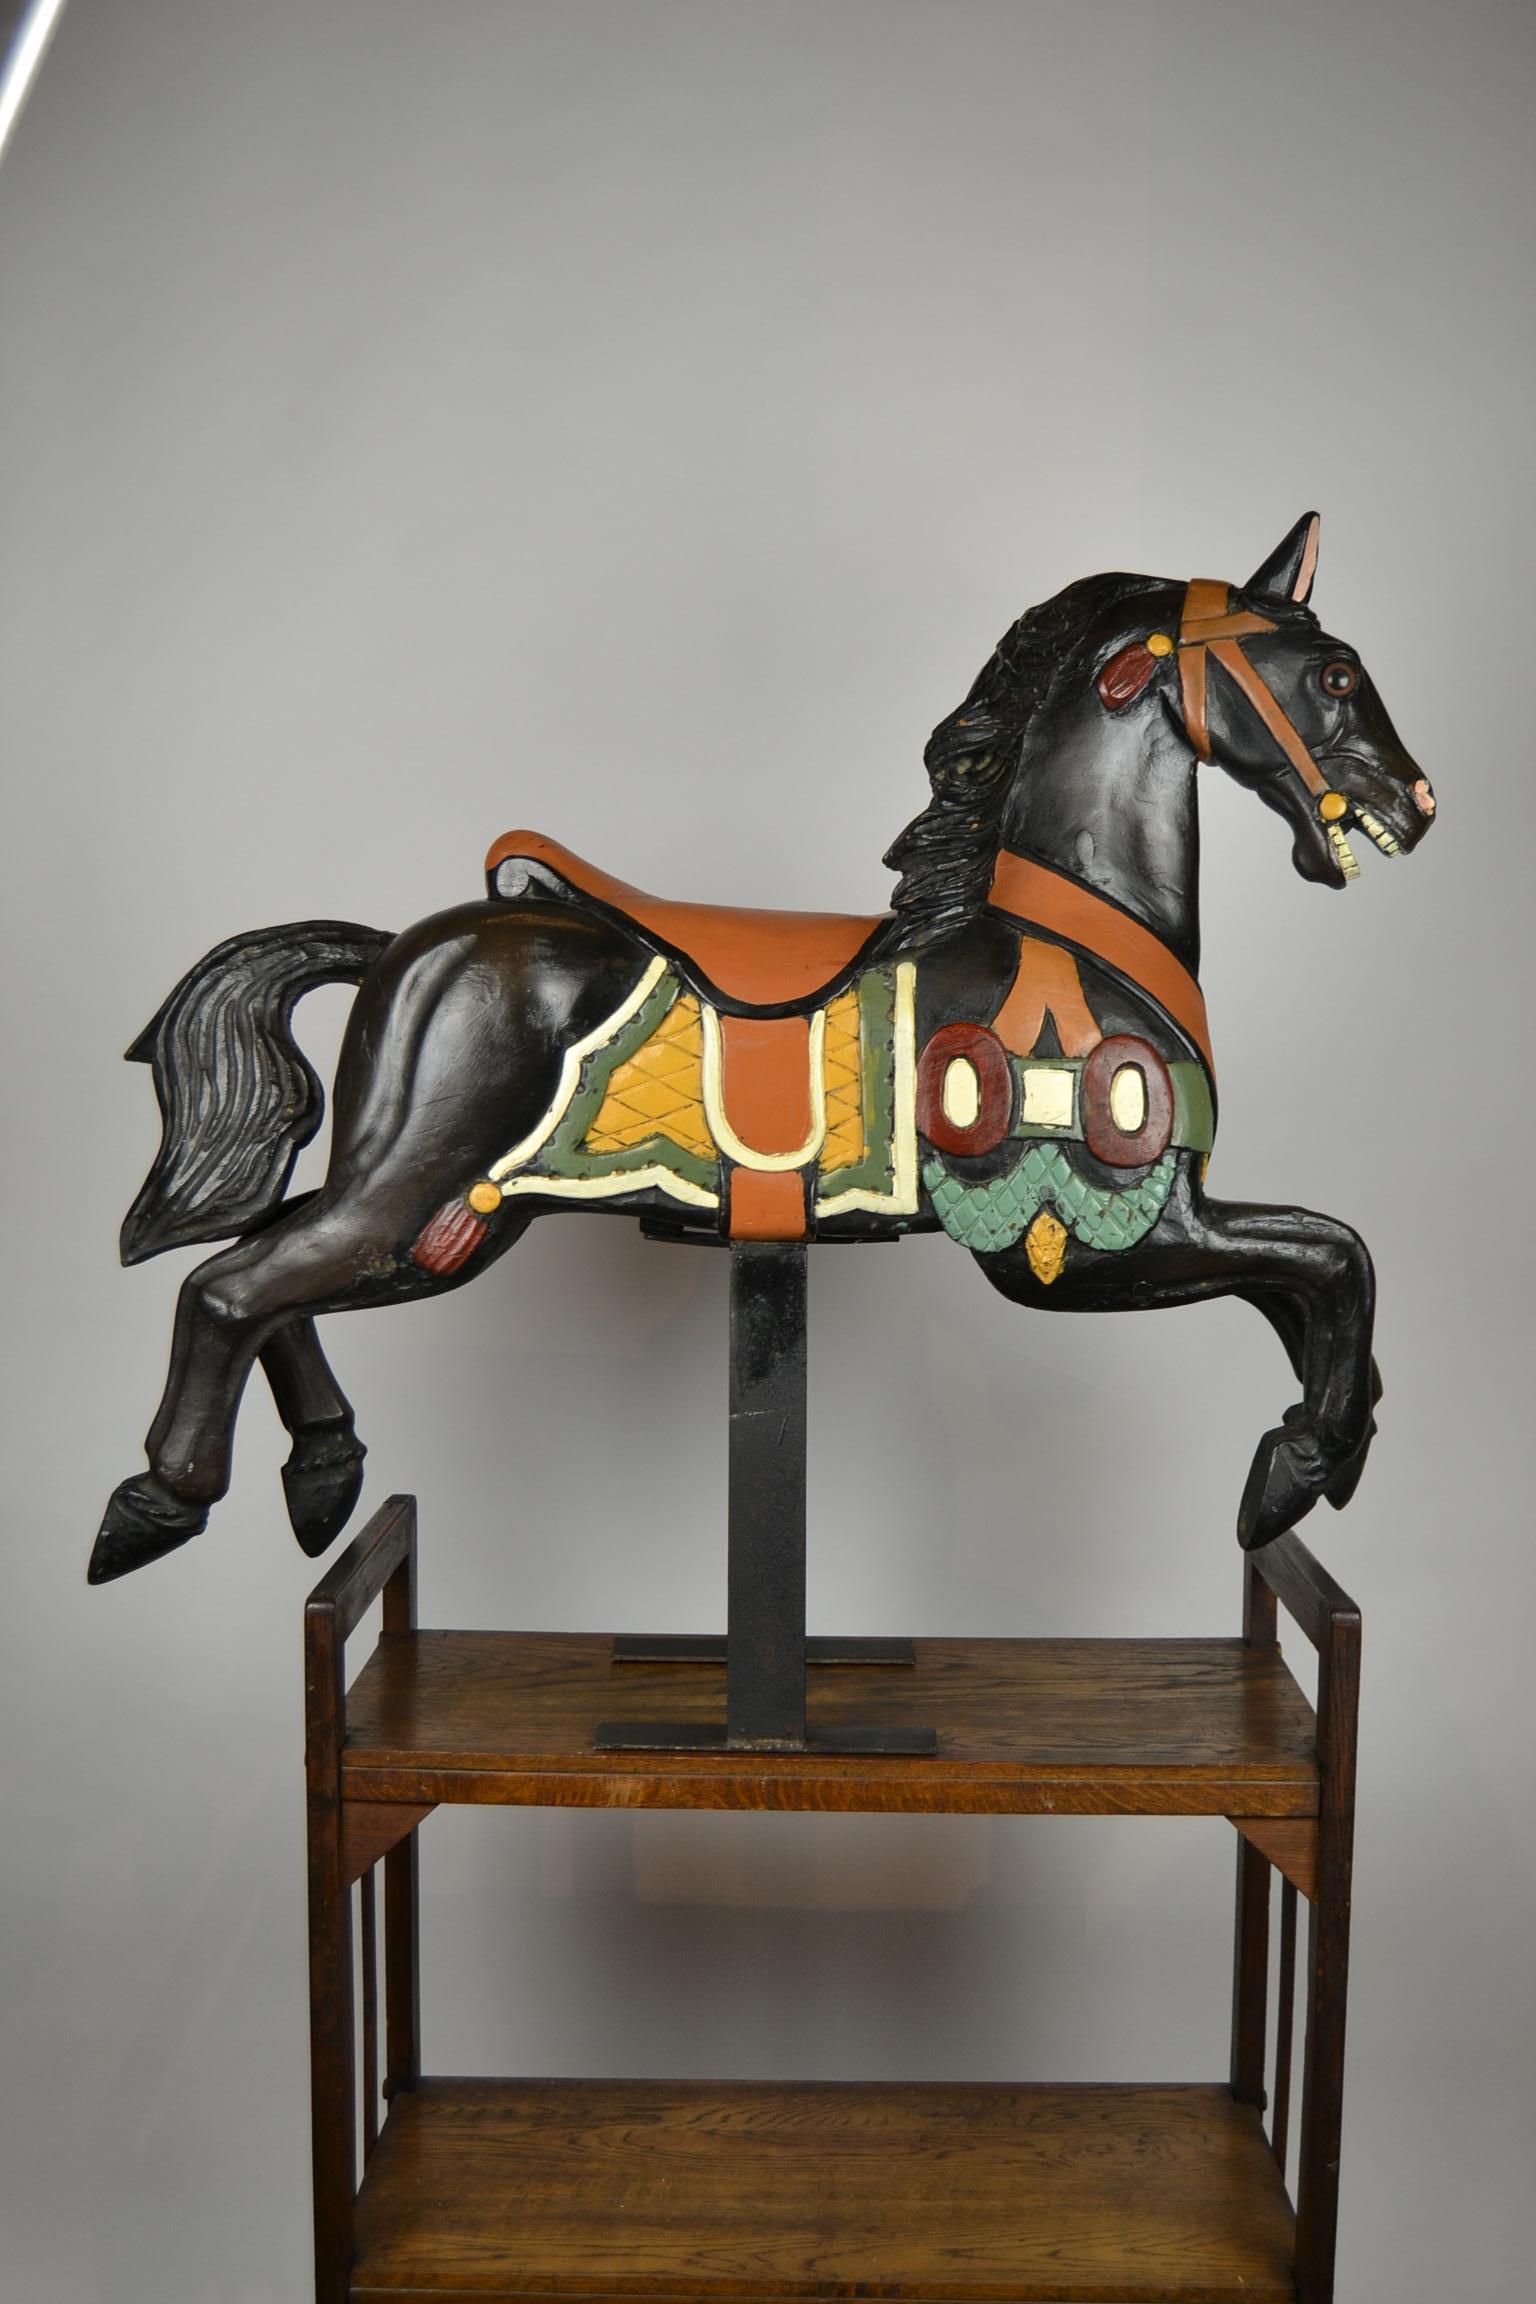 Wooden Carousel Horse - Fairground horse - Merry-go-round Horse.
Smaller model, so easy to be placed.
This Mid-20th century hand carved Animal Sculpture is a
Black horse - Black Beauty mounted on a metal base.
It's hand painted with colored